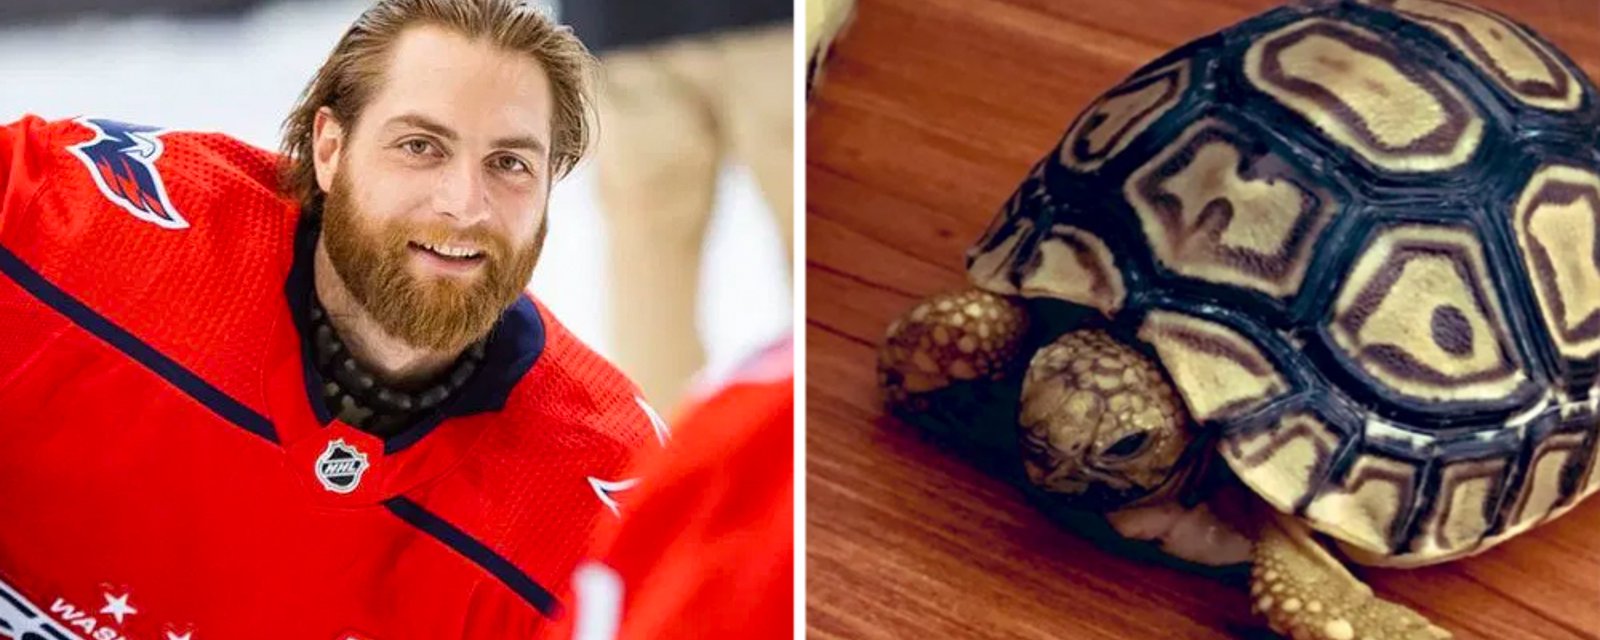 Braden Holtby stuck at the Canadian border with his turtles